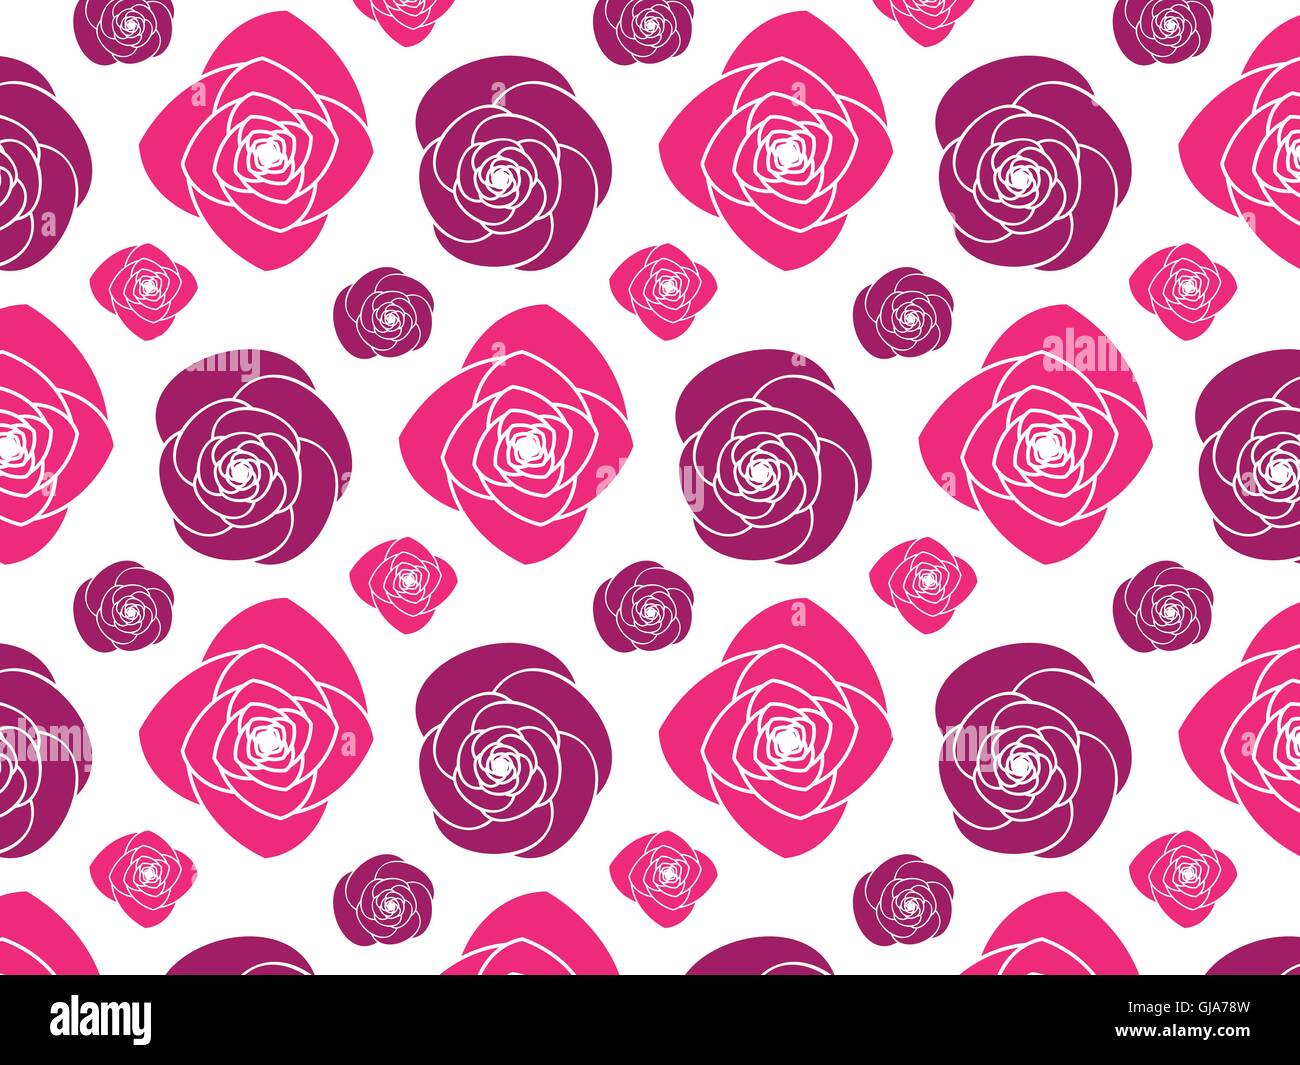 Scalable Pink Peony Flower Pattern Stock Vector